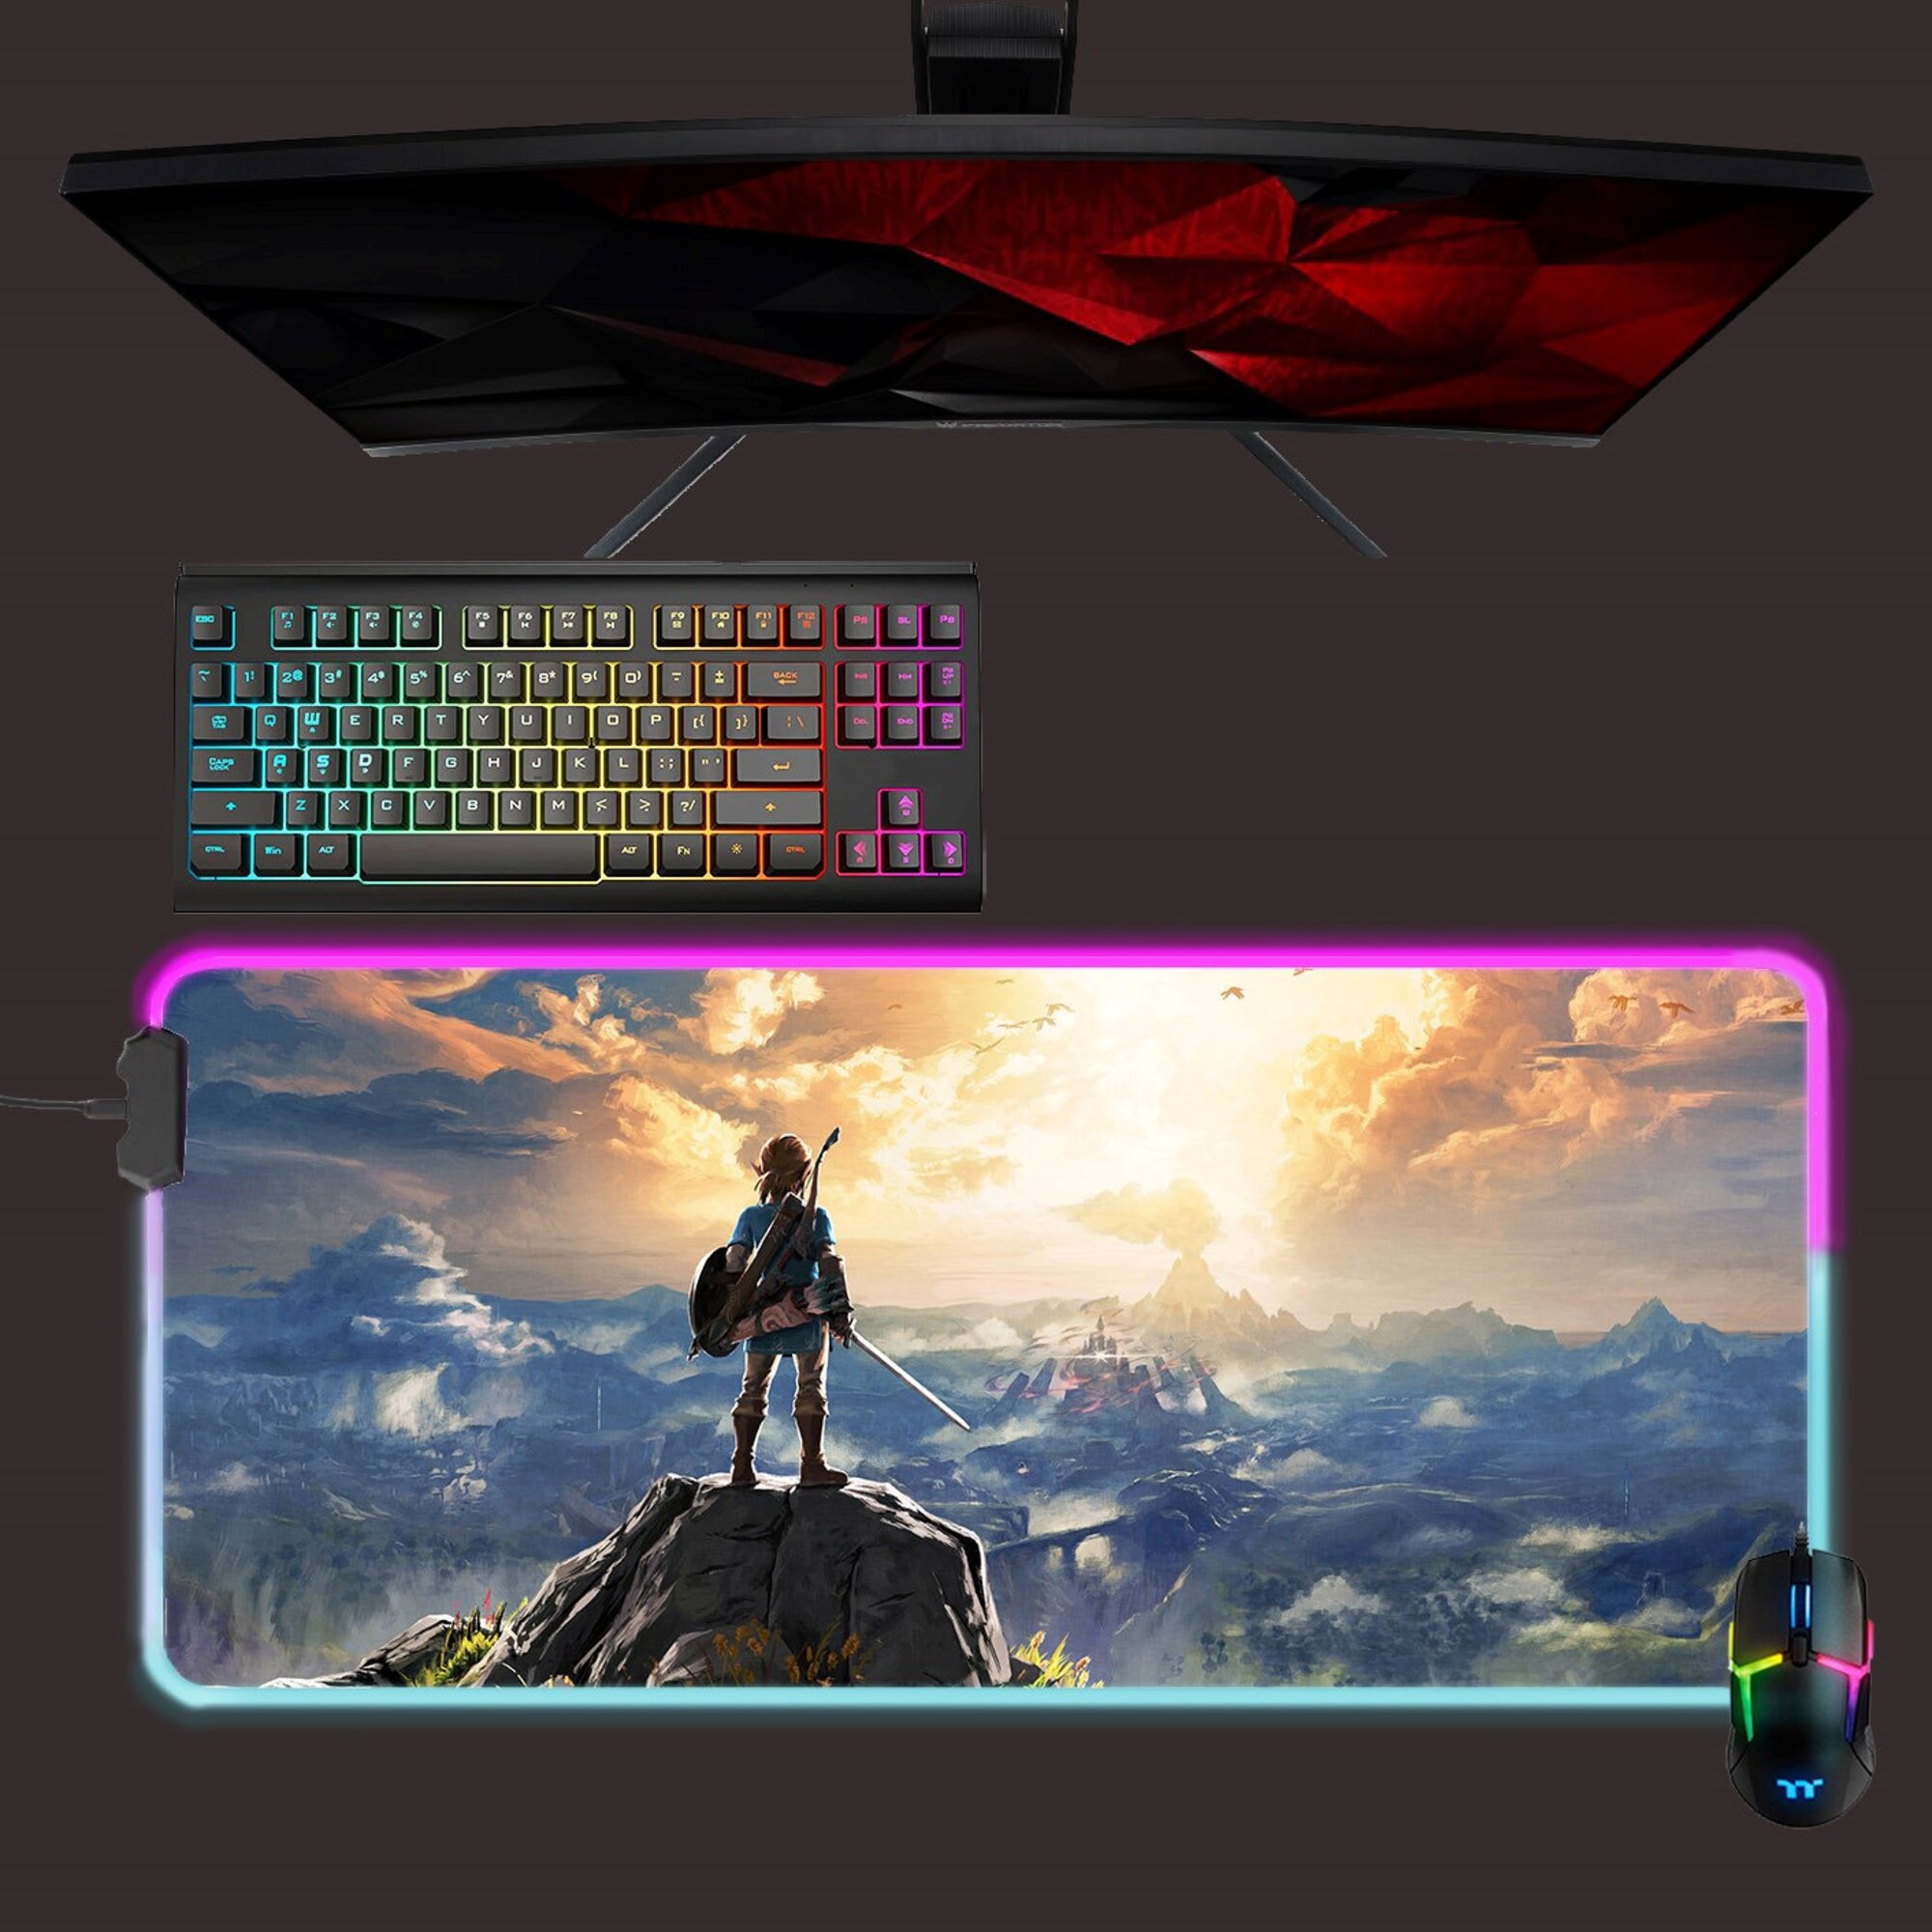 The legend of zelda led mouse pad, Breath of the wild Link rgb mouse mat, gaming mouse pad, led desk mat